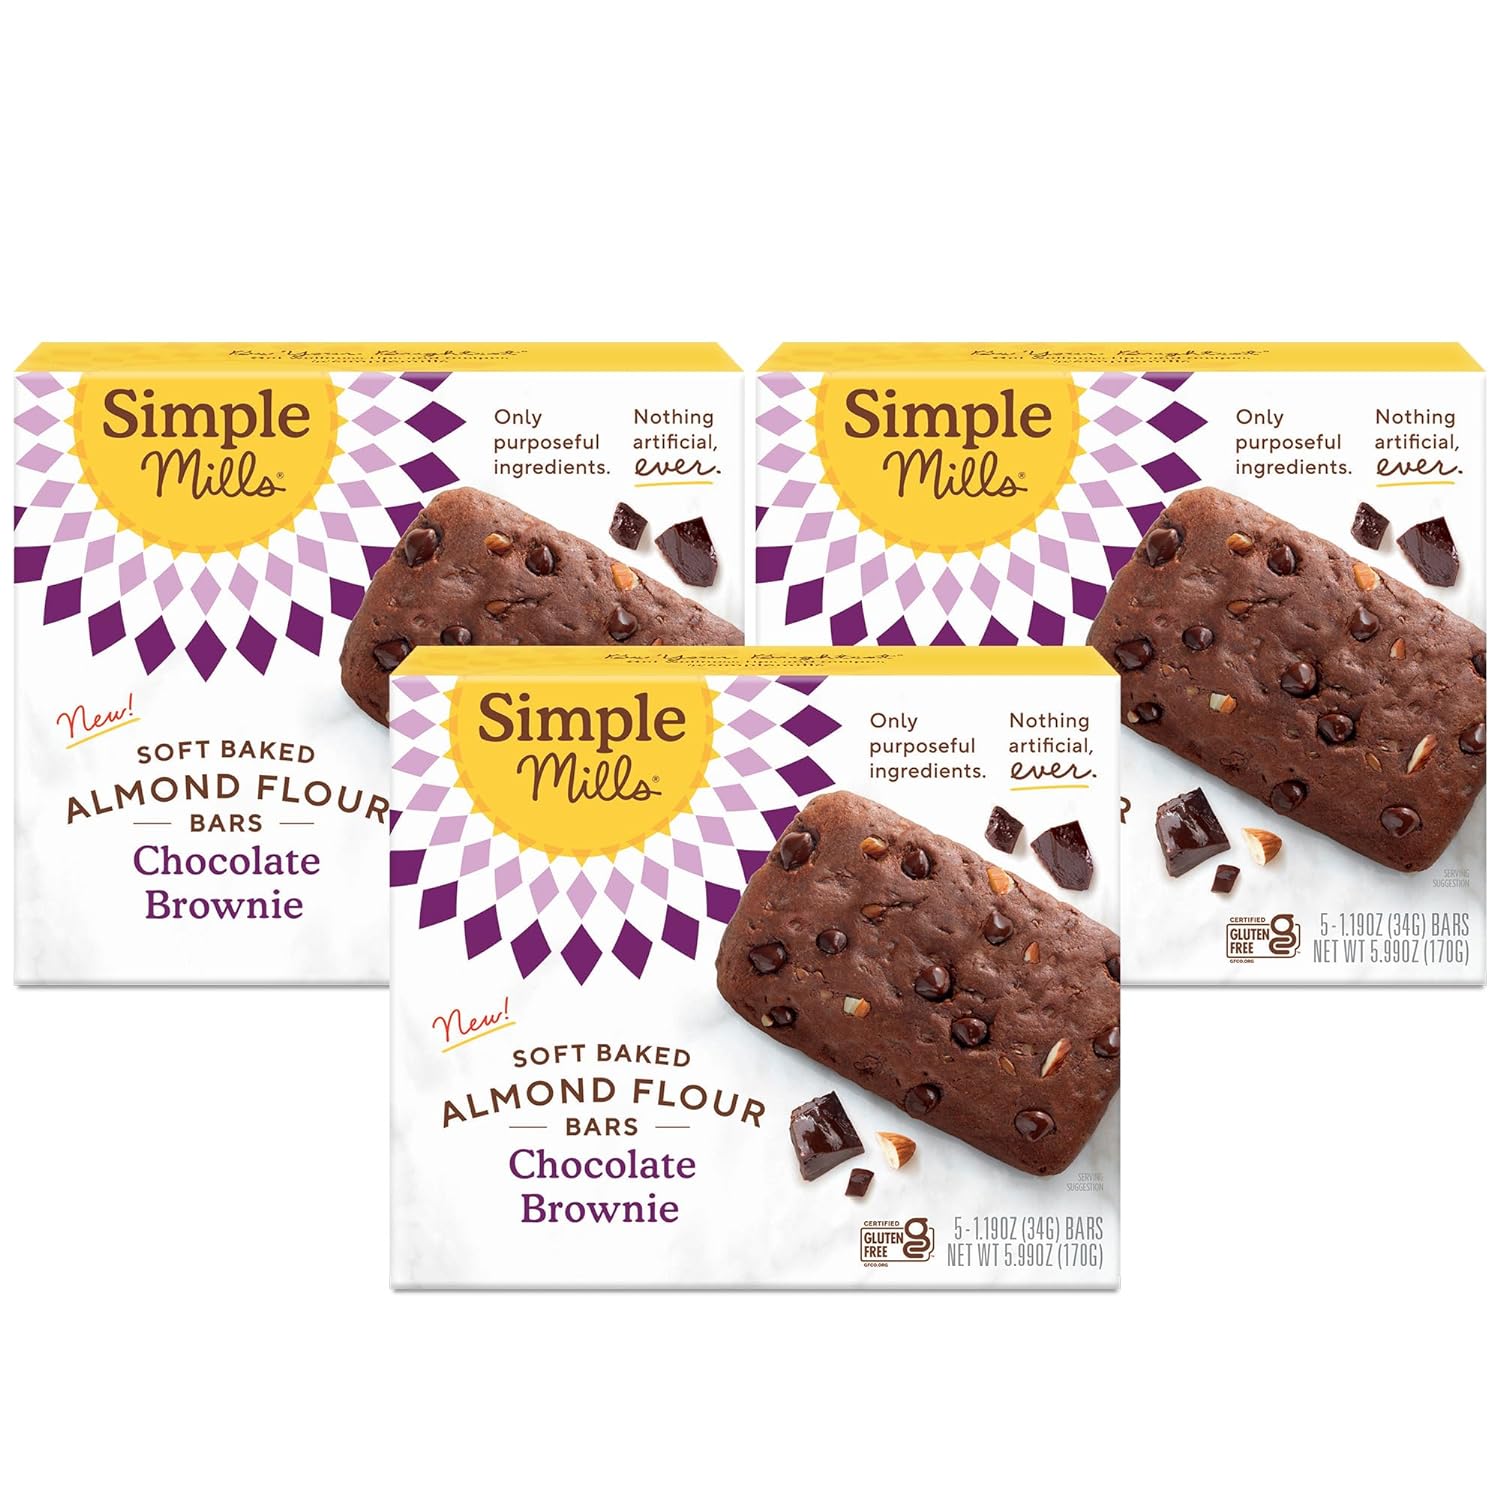 Simple Mills Almond Flour Snack Bars (Chocolate Brownie) with Organic Coconut Oil, Chia Seeds, Sunflower Seeds, and Flax Seeds, 6oz, 3 Count